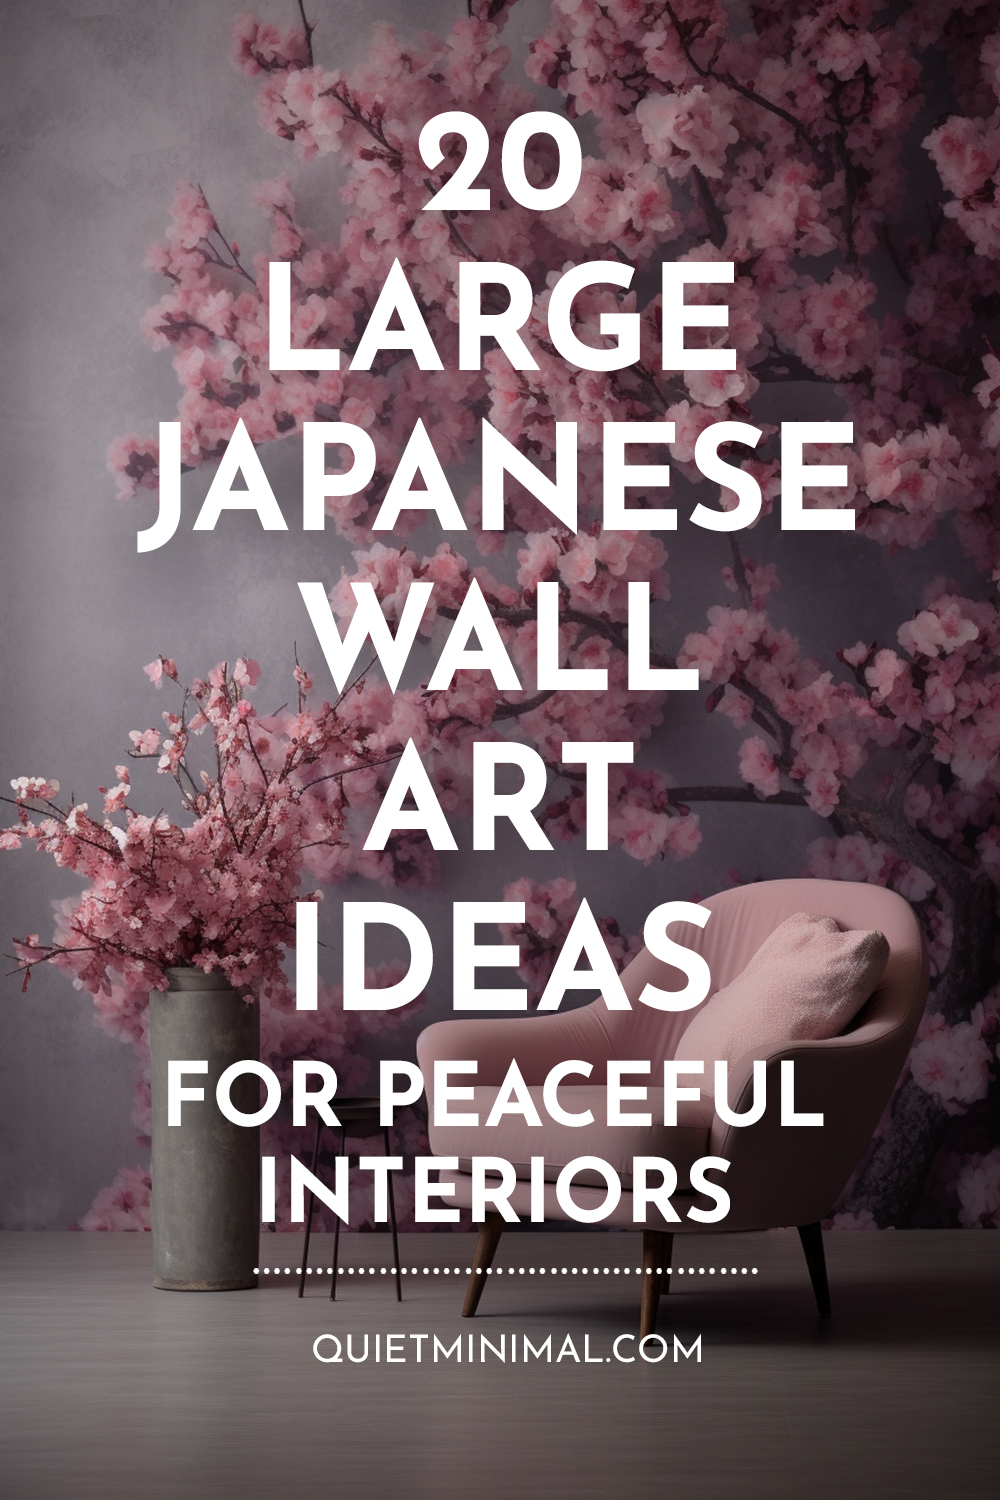 20 large Japanese wall art ideas for peaceful interiors. Explore beautiful Japanese paintings and canvases that will transform your space into a tranquil oasis.